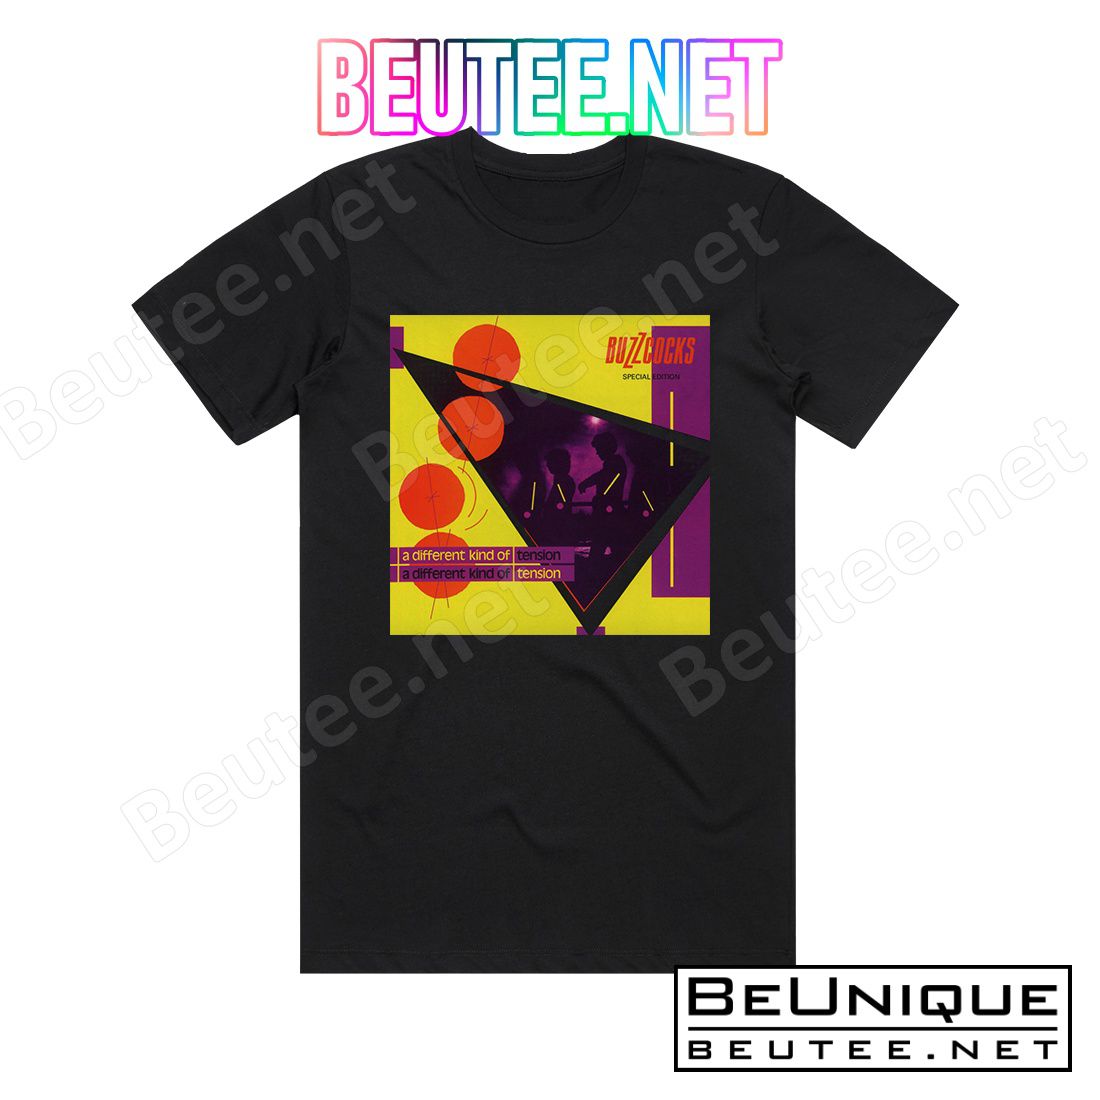 Buzzcocks A Different Kind Of Tension Album Cover T-Shirt